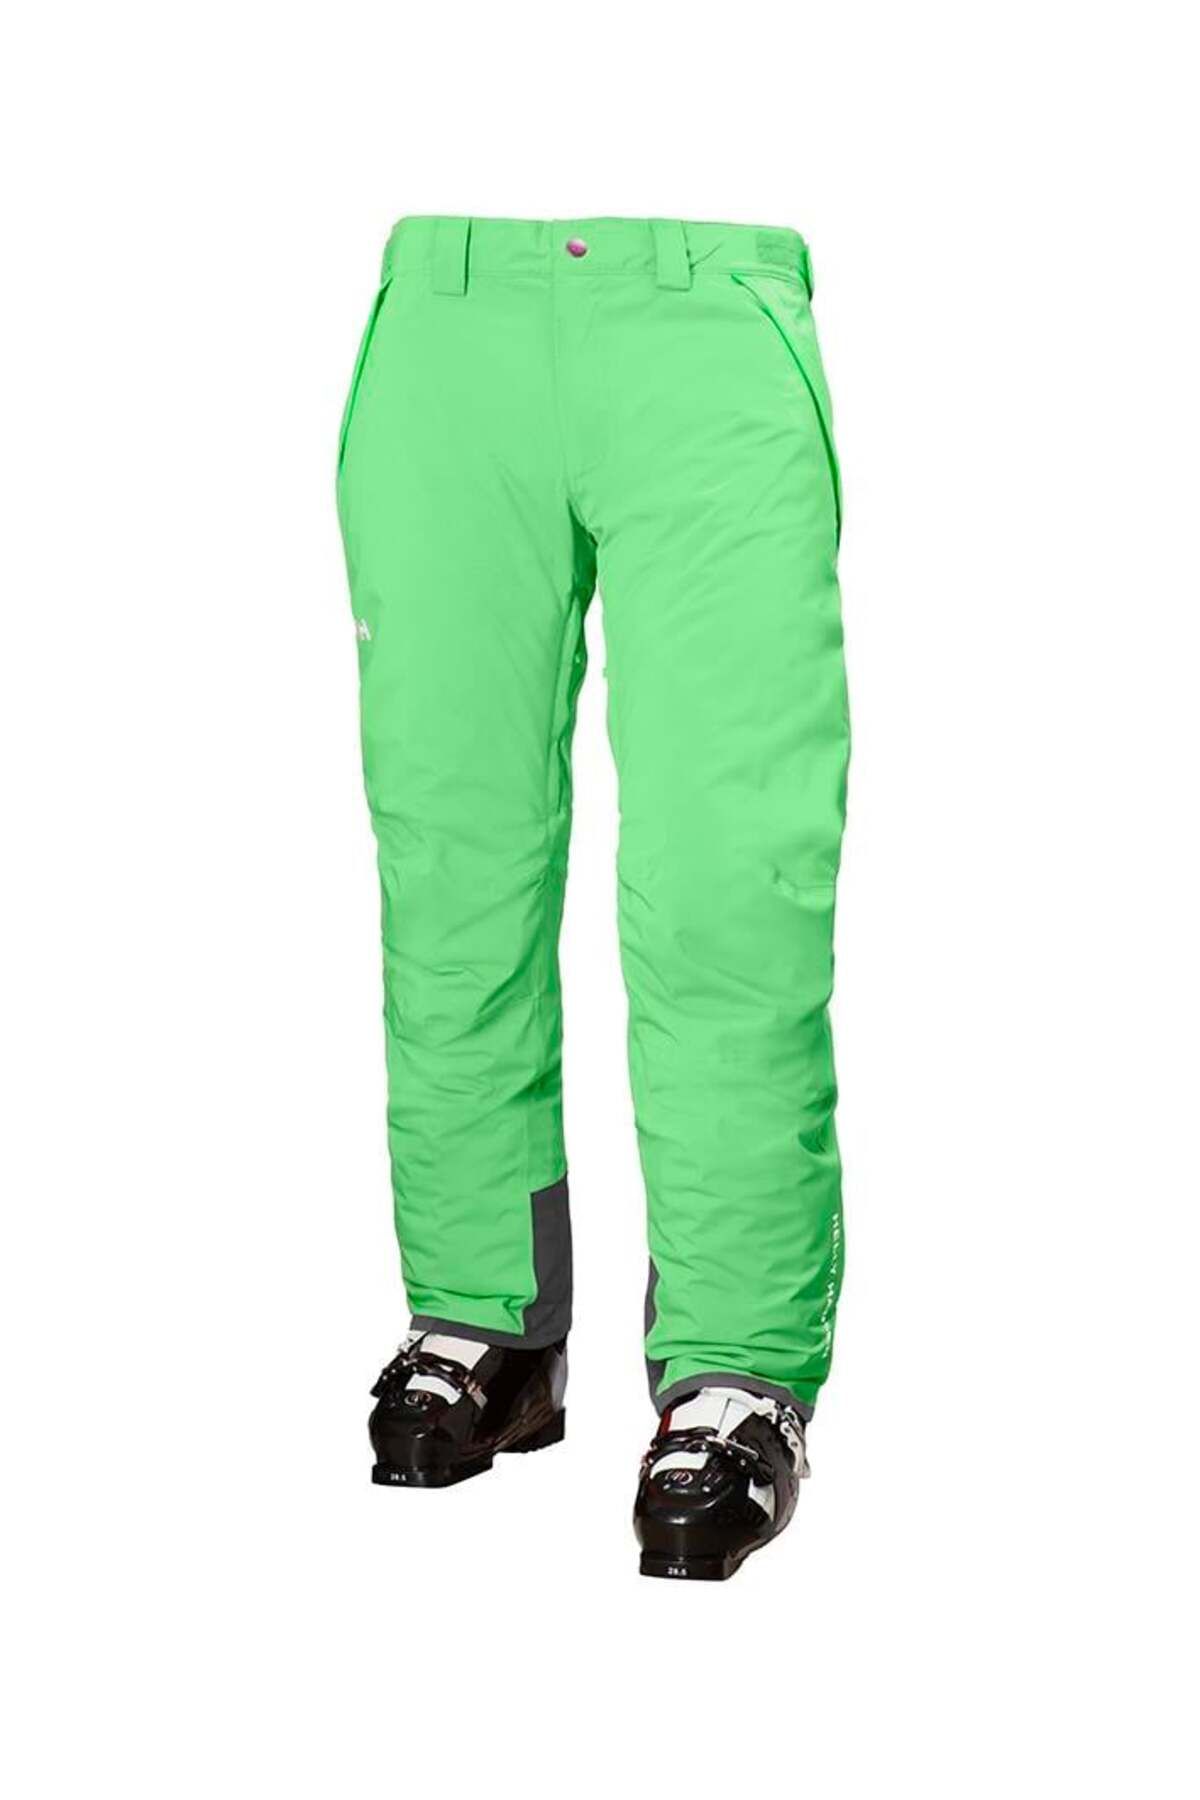 Helly Hansen Hh Velocıty Insulated Pant